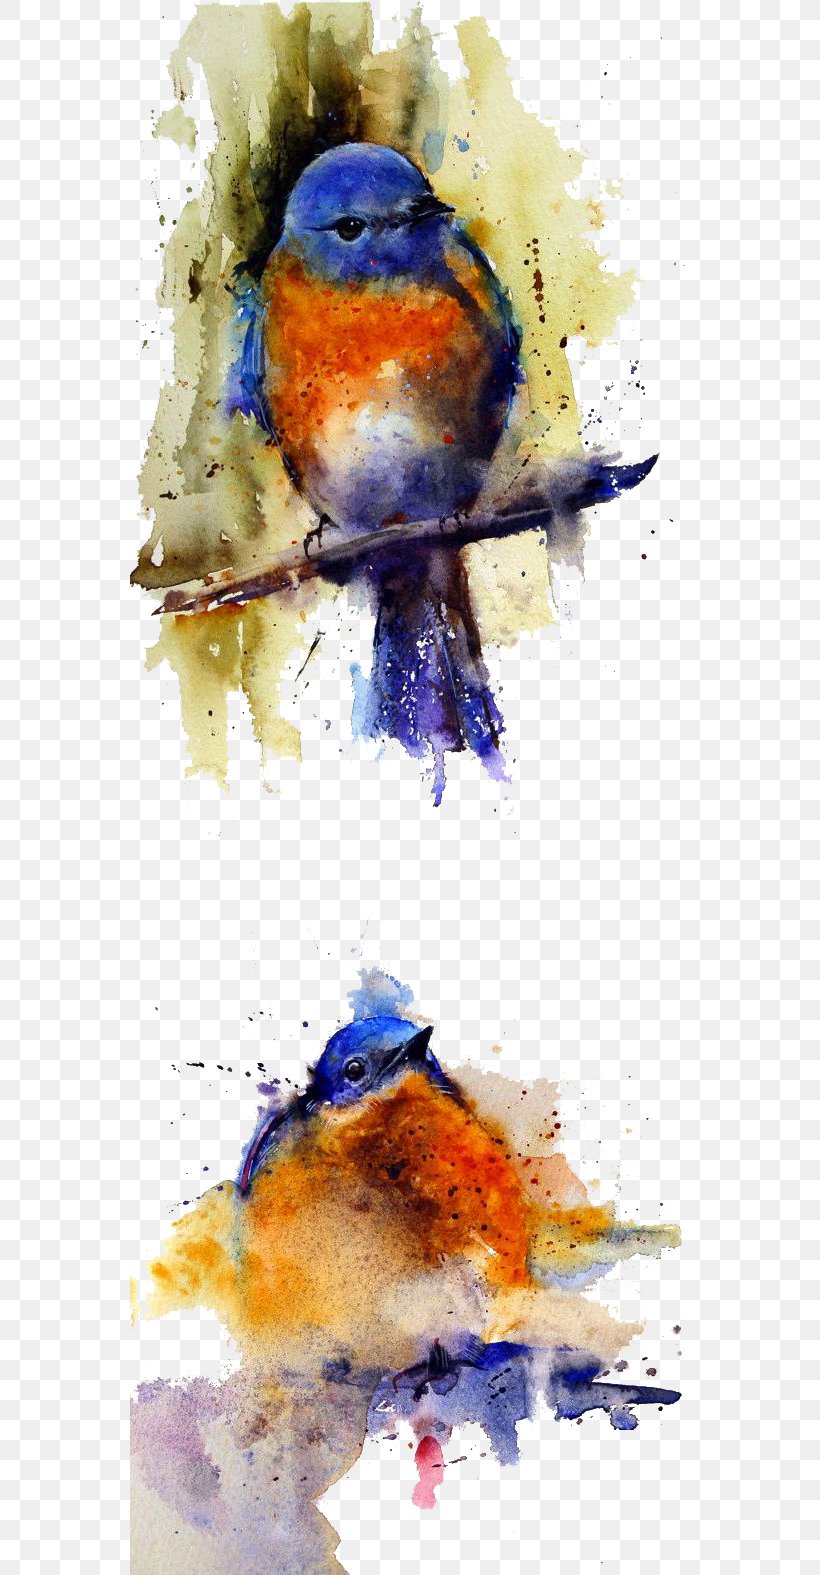 Watercolor: Animals Watercolor Painting Artist Oil Painting, PNG, 559x1575px, Watercolor Animals, Art, Artist, Canvas, Canvas Print Download Free